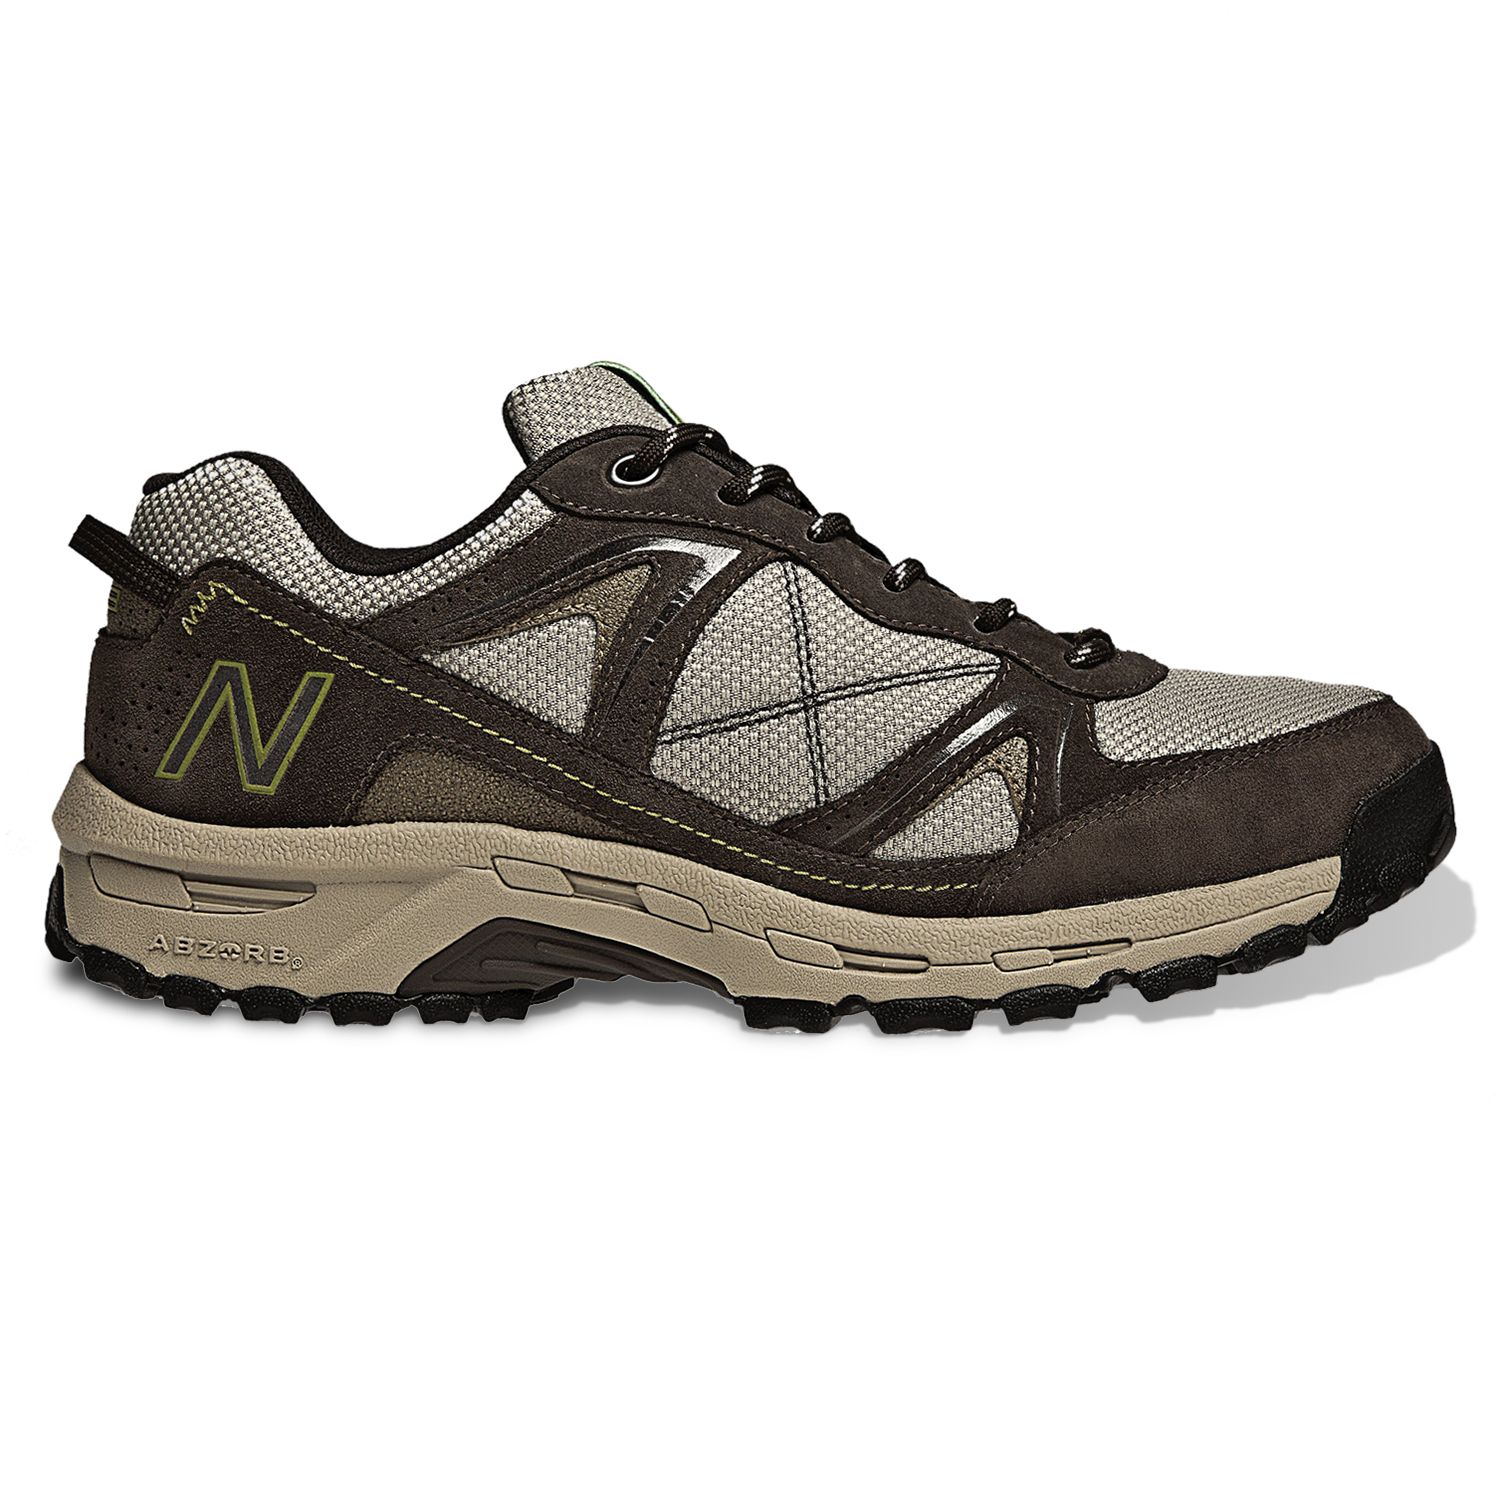 new balance men's walking shoes extra wide